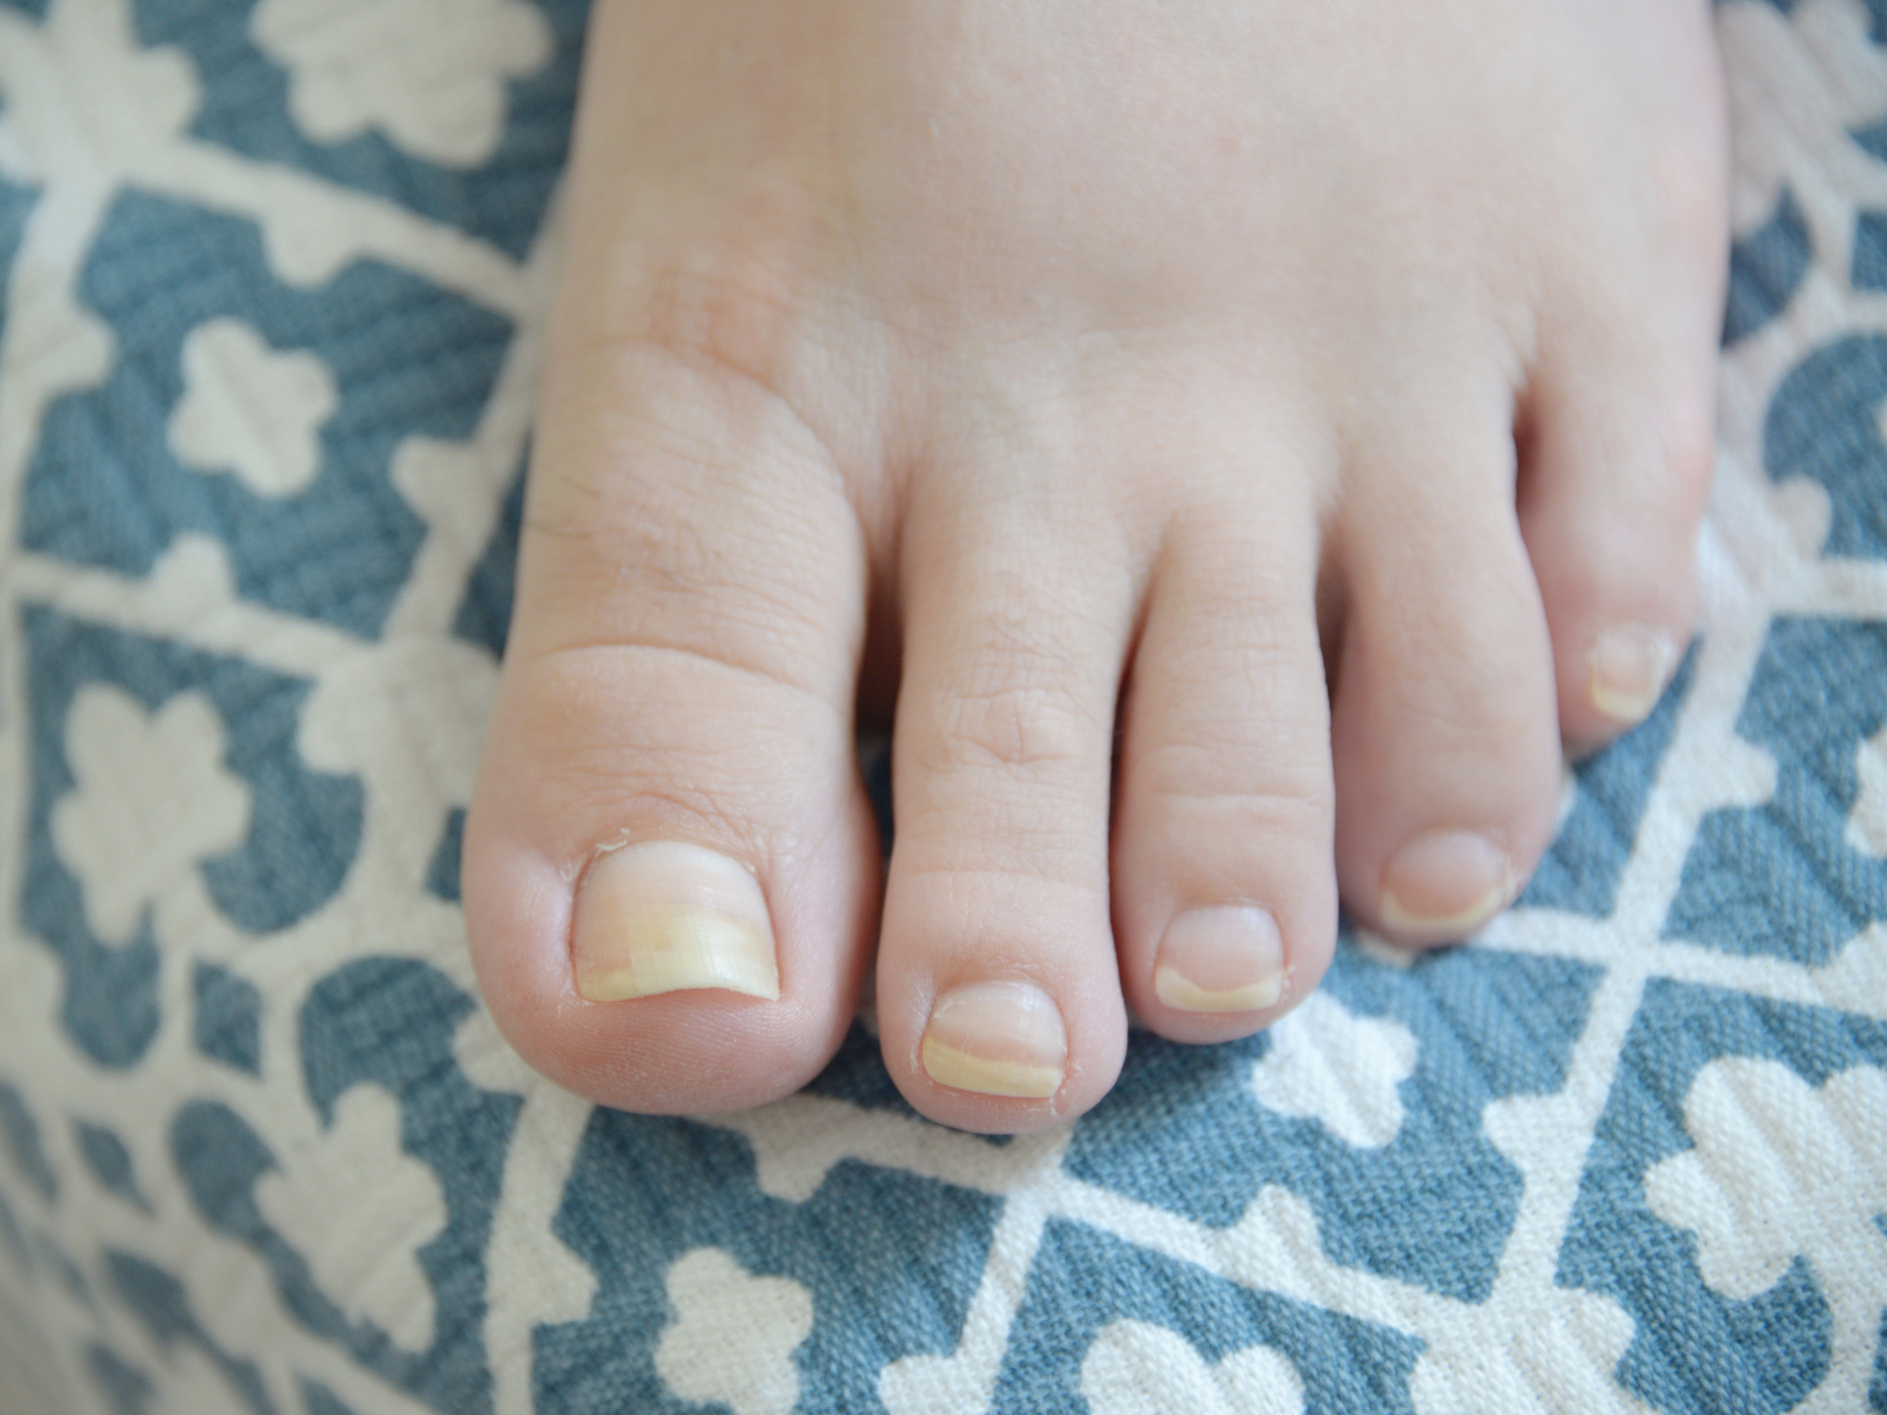 1. Yellow and White Floral Toe Nail Art - wide 3